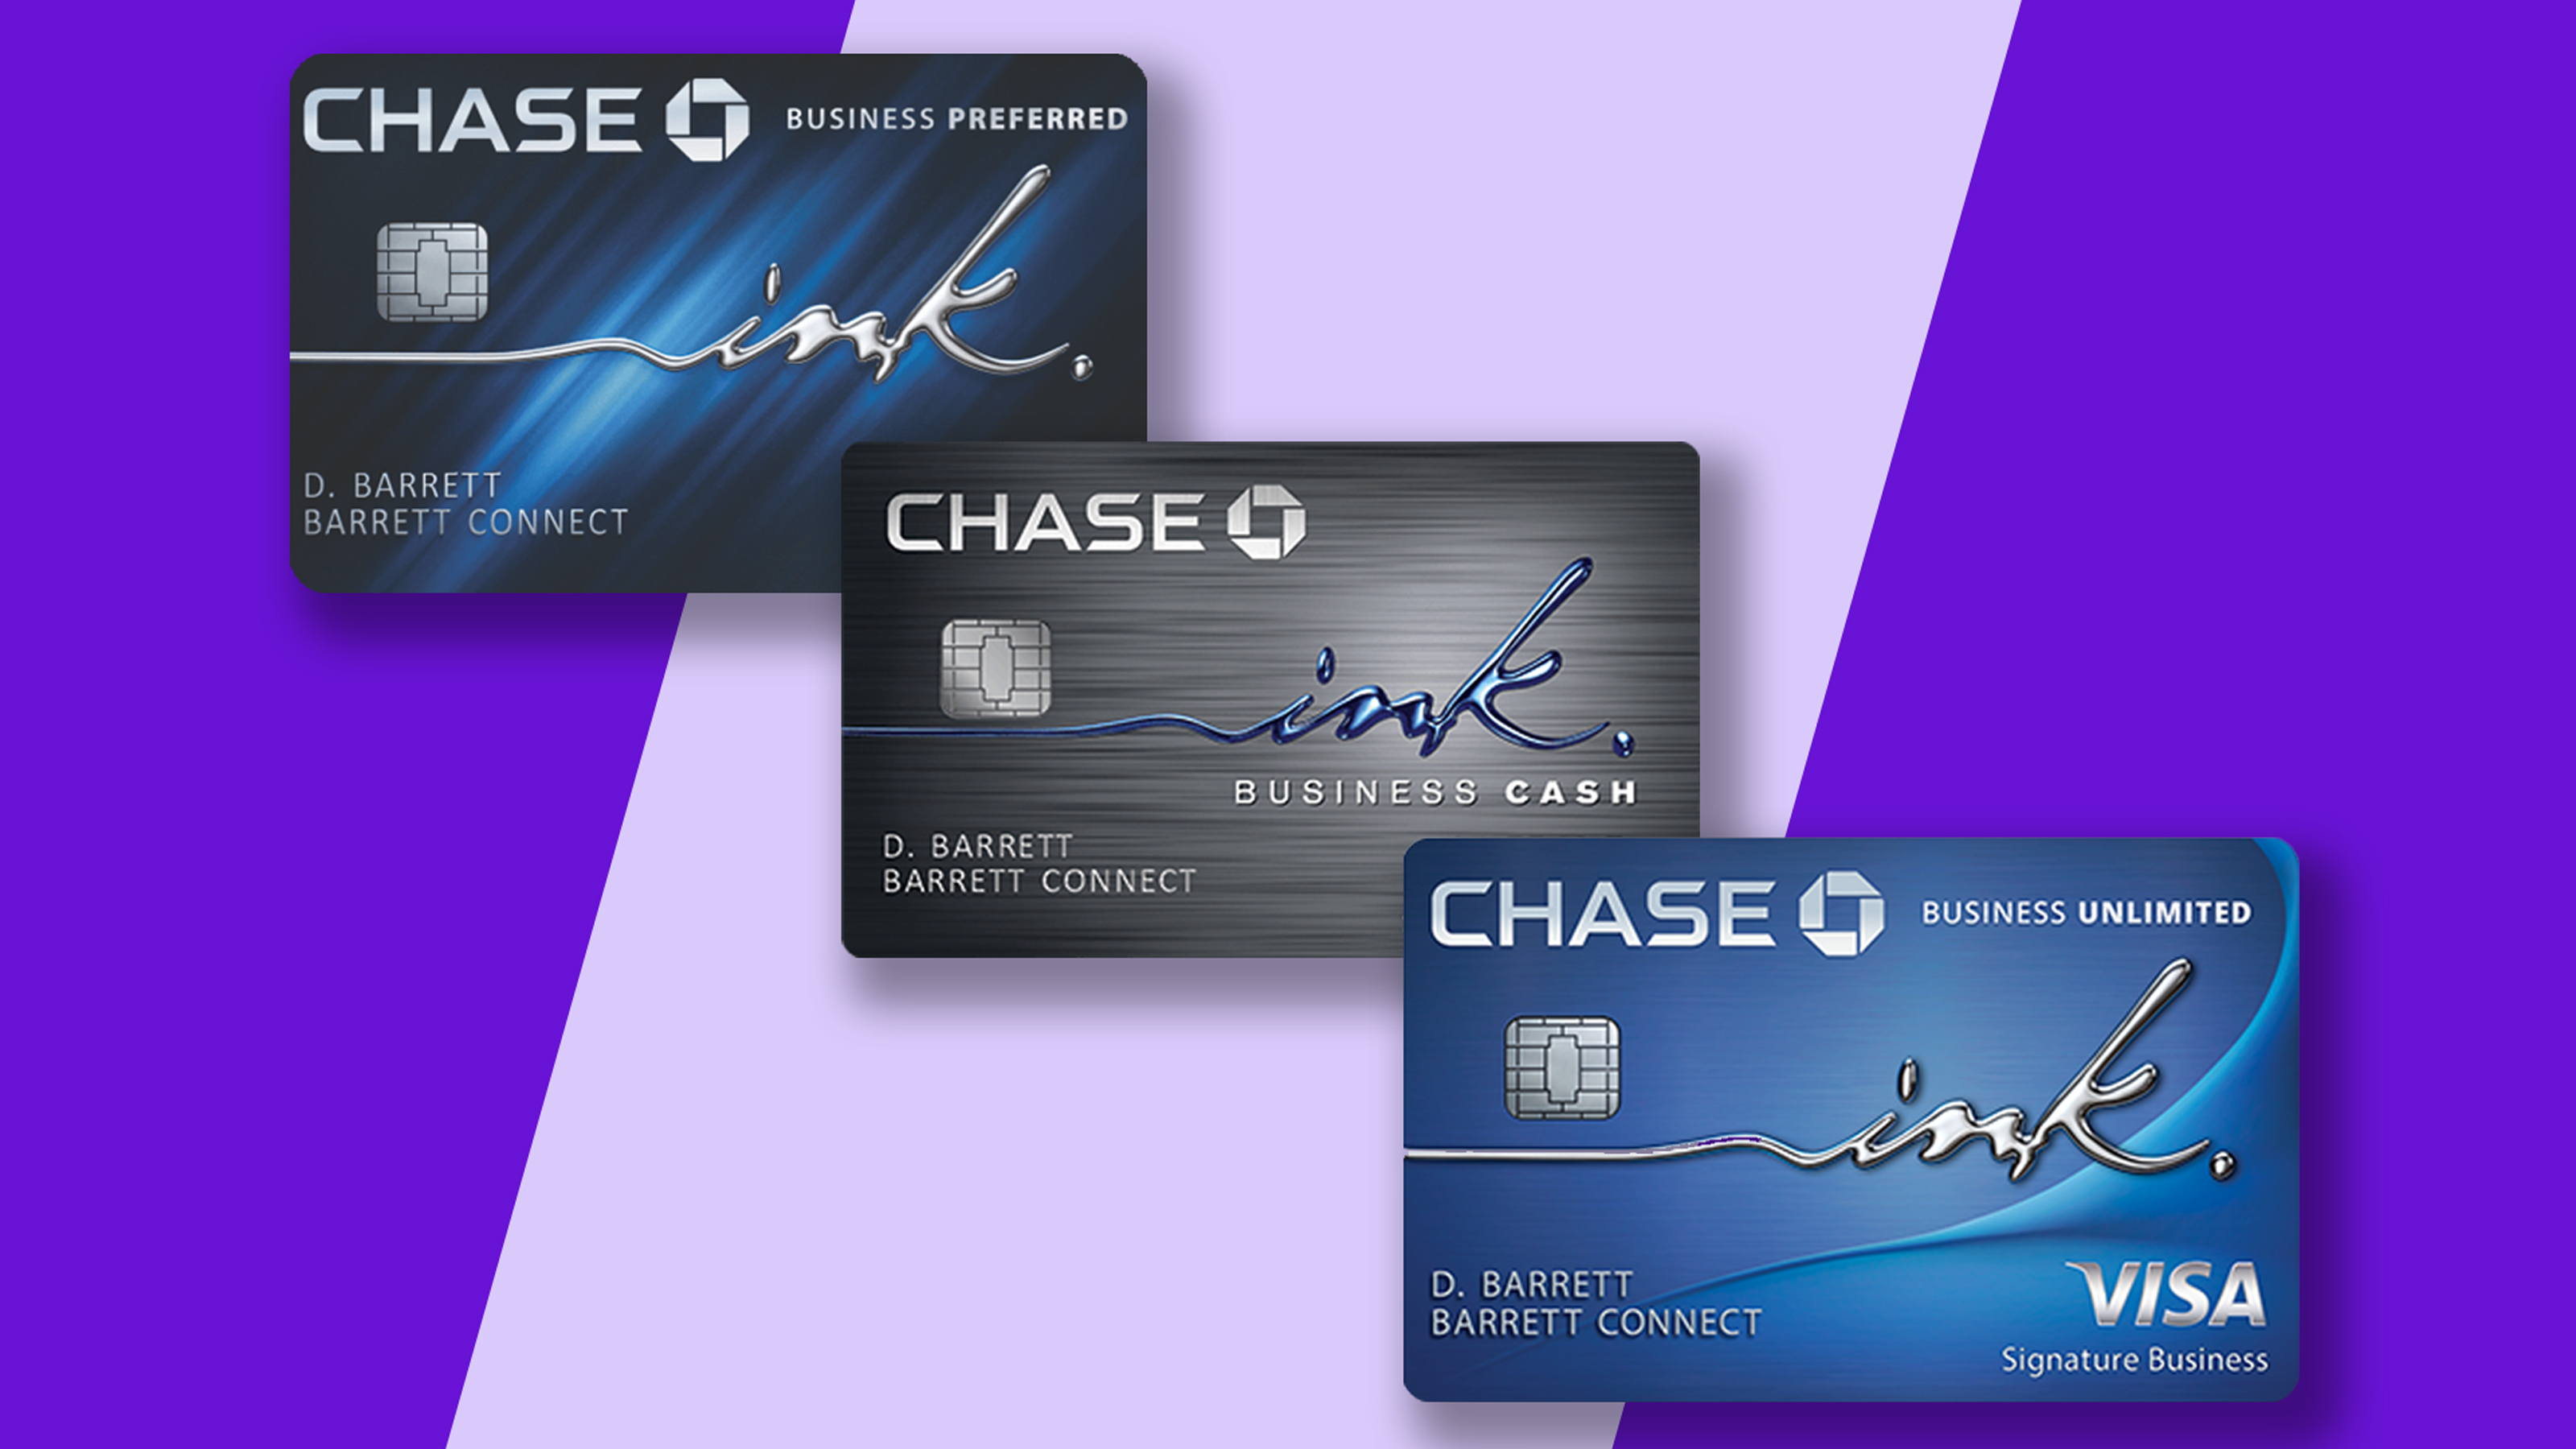 Chase Business Card. Chase credit Card Phone number. Карта кэш Инк. Southwest credit Card. Бизнес кредит карта